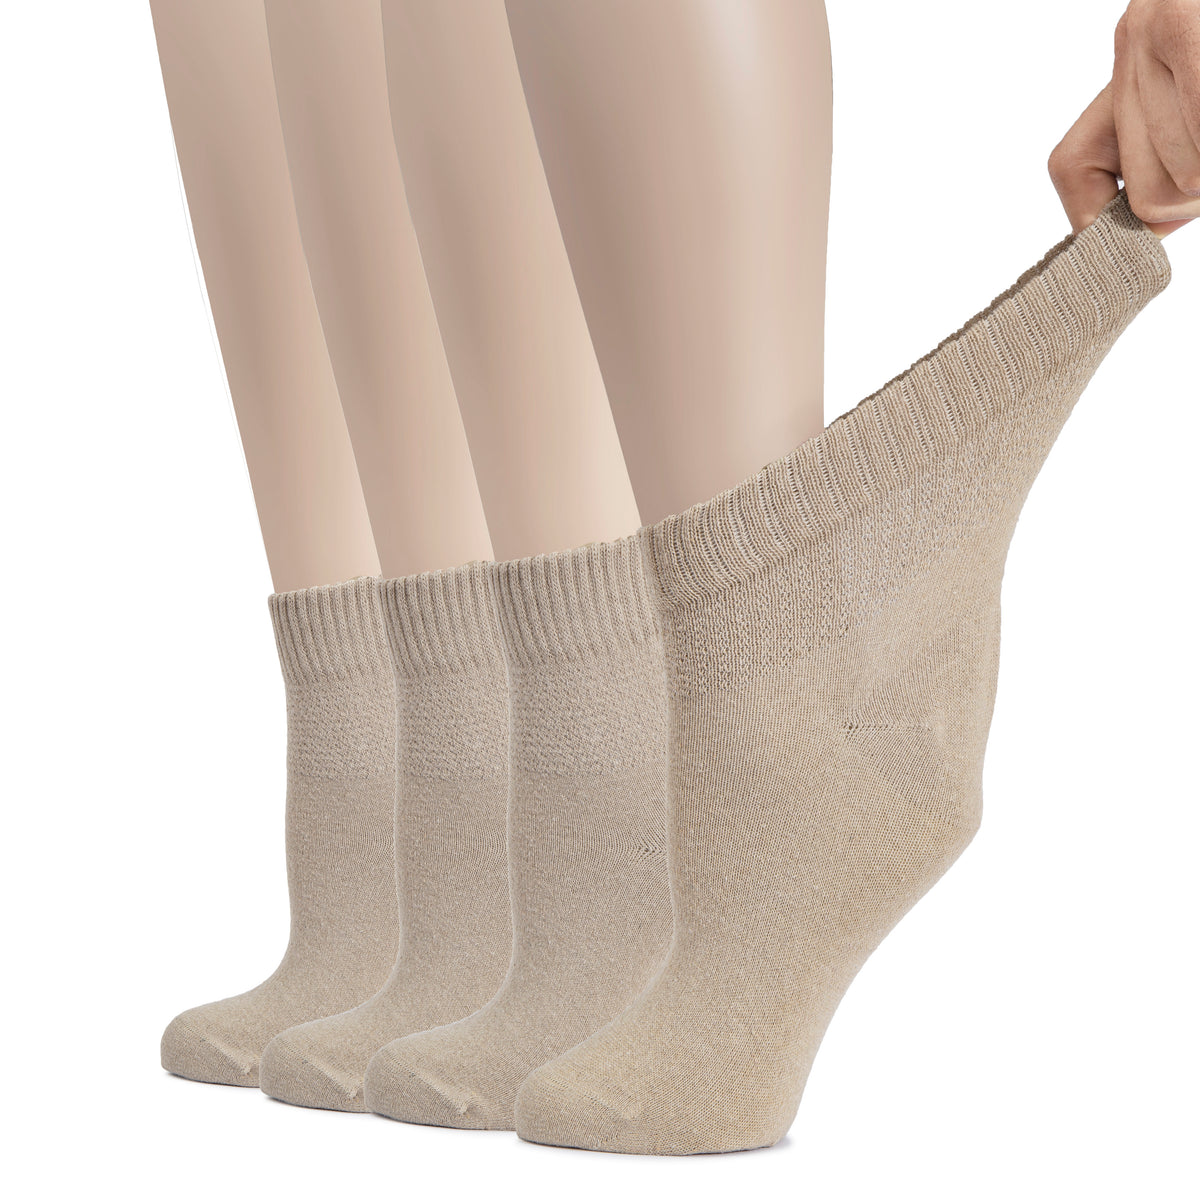 These beige socks are designed for women with diabetes. The image shows a woman's feet in Women's Cotton Diabetic Ankle Socks.